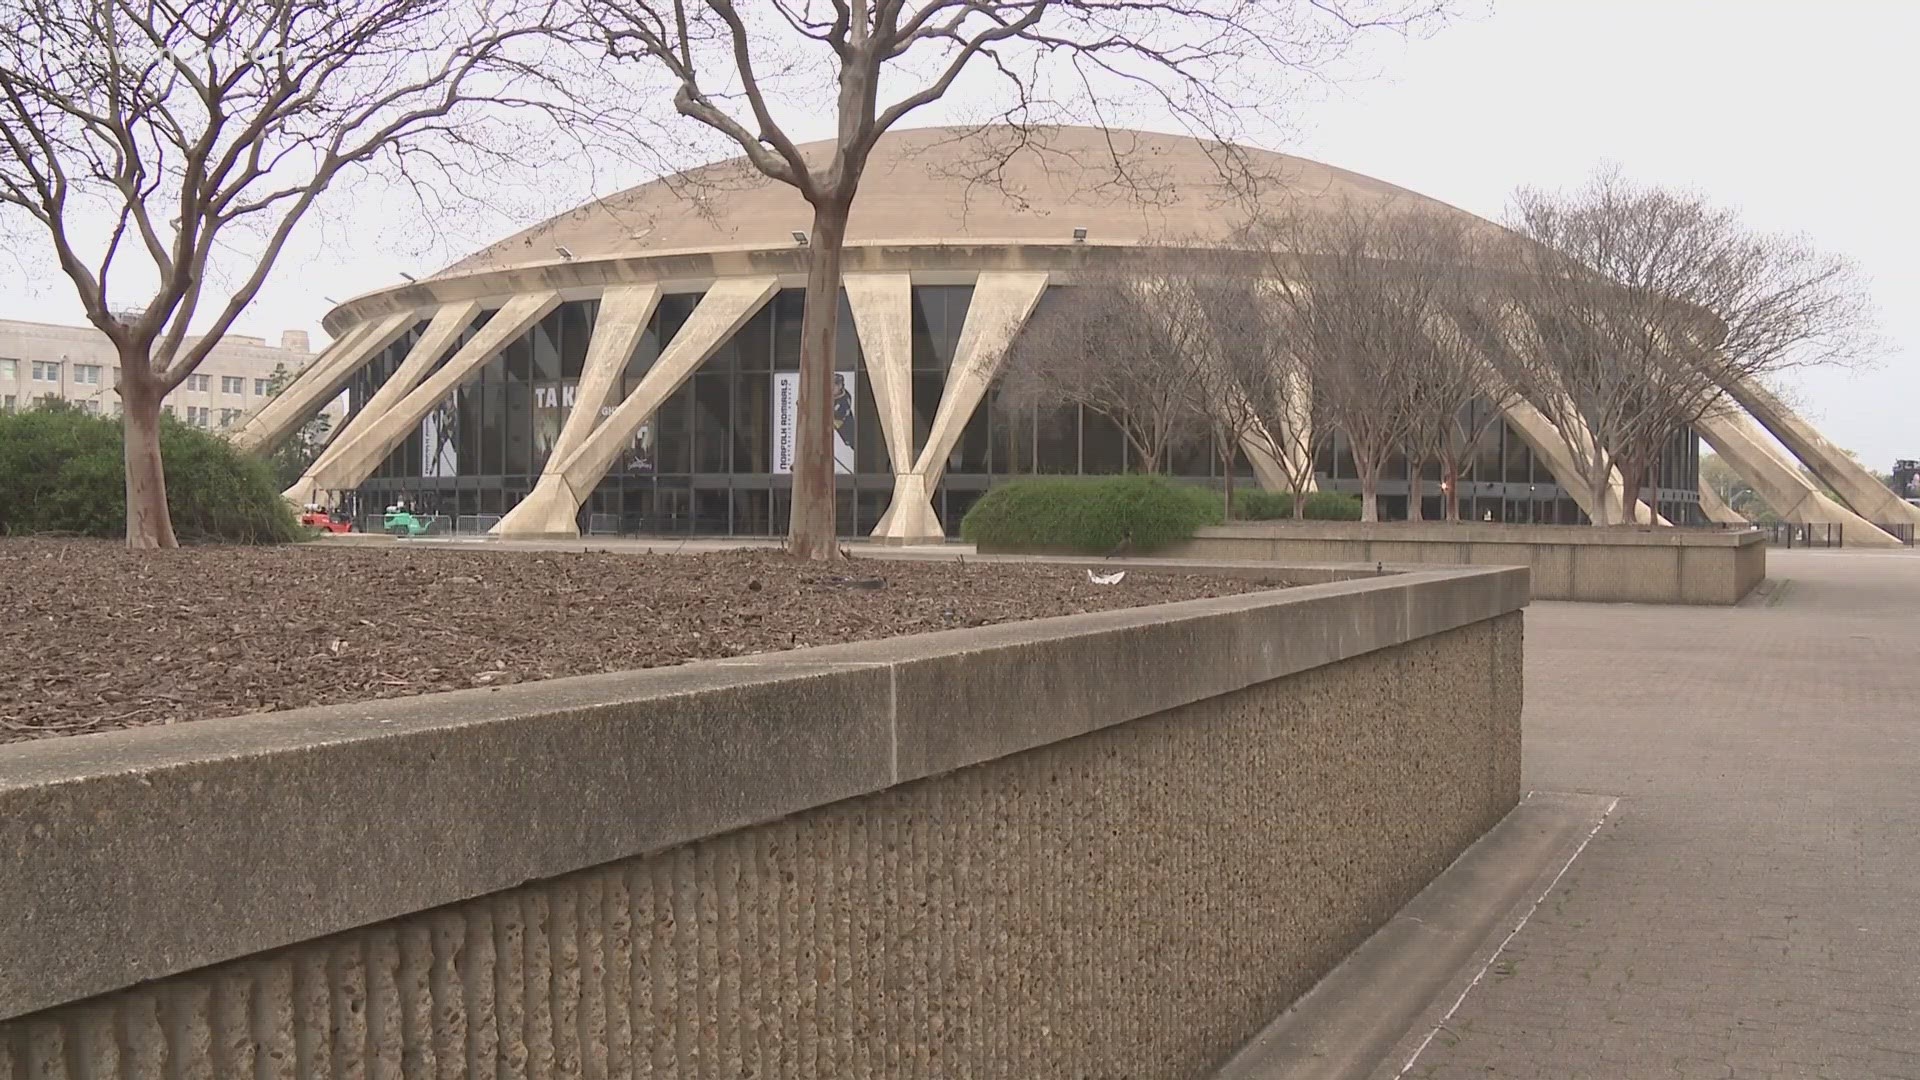 The band known for songs "BANG!" and "Weak" cancelled the performance early Tuesday, saying Norfolk Scope Arena was too small for "the scale of the show."